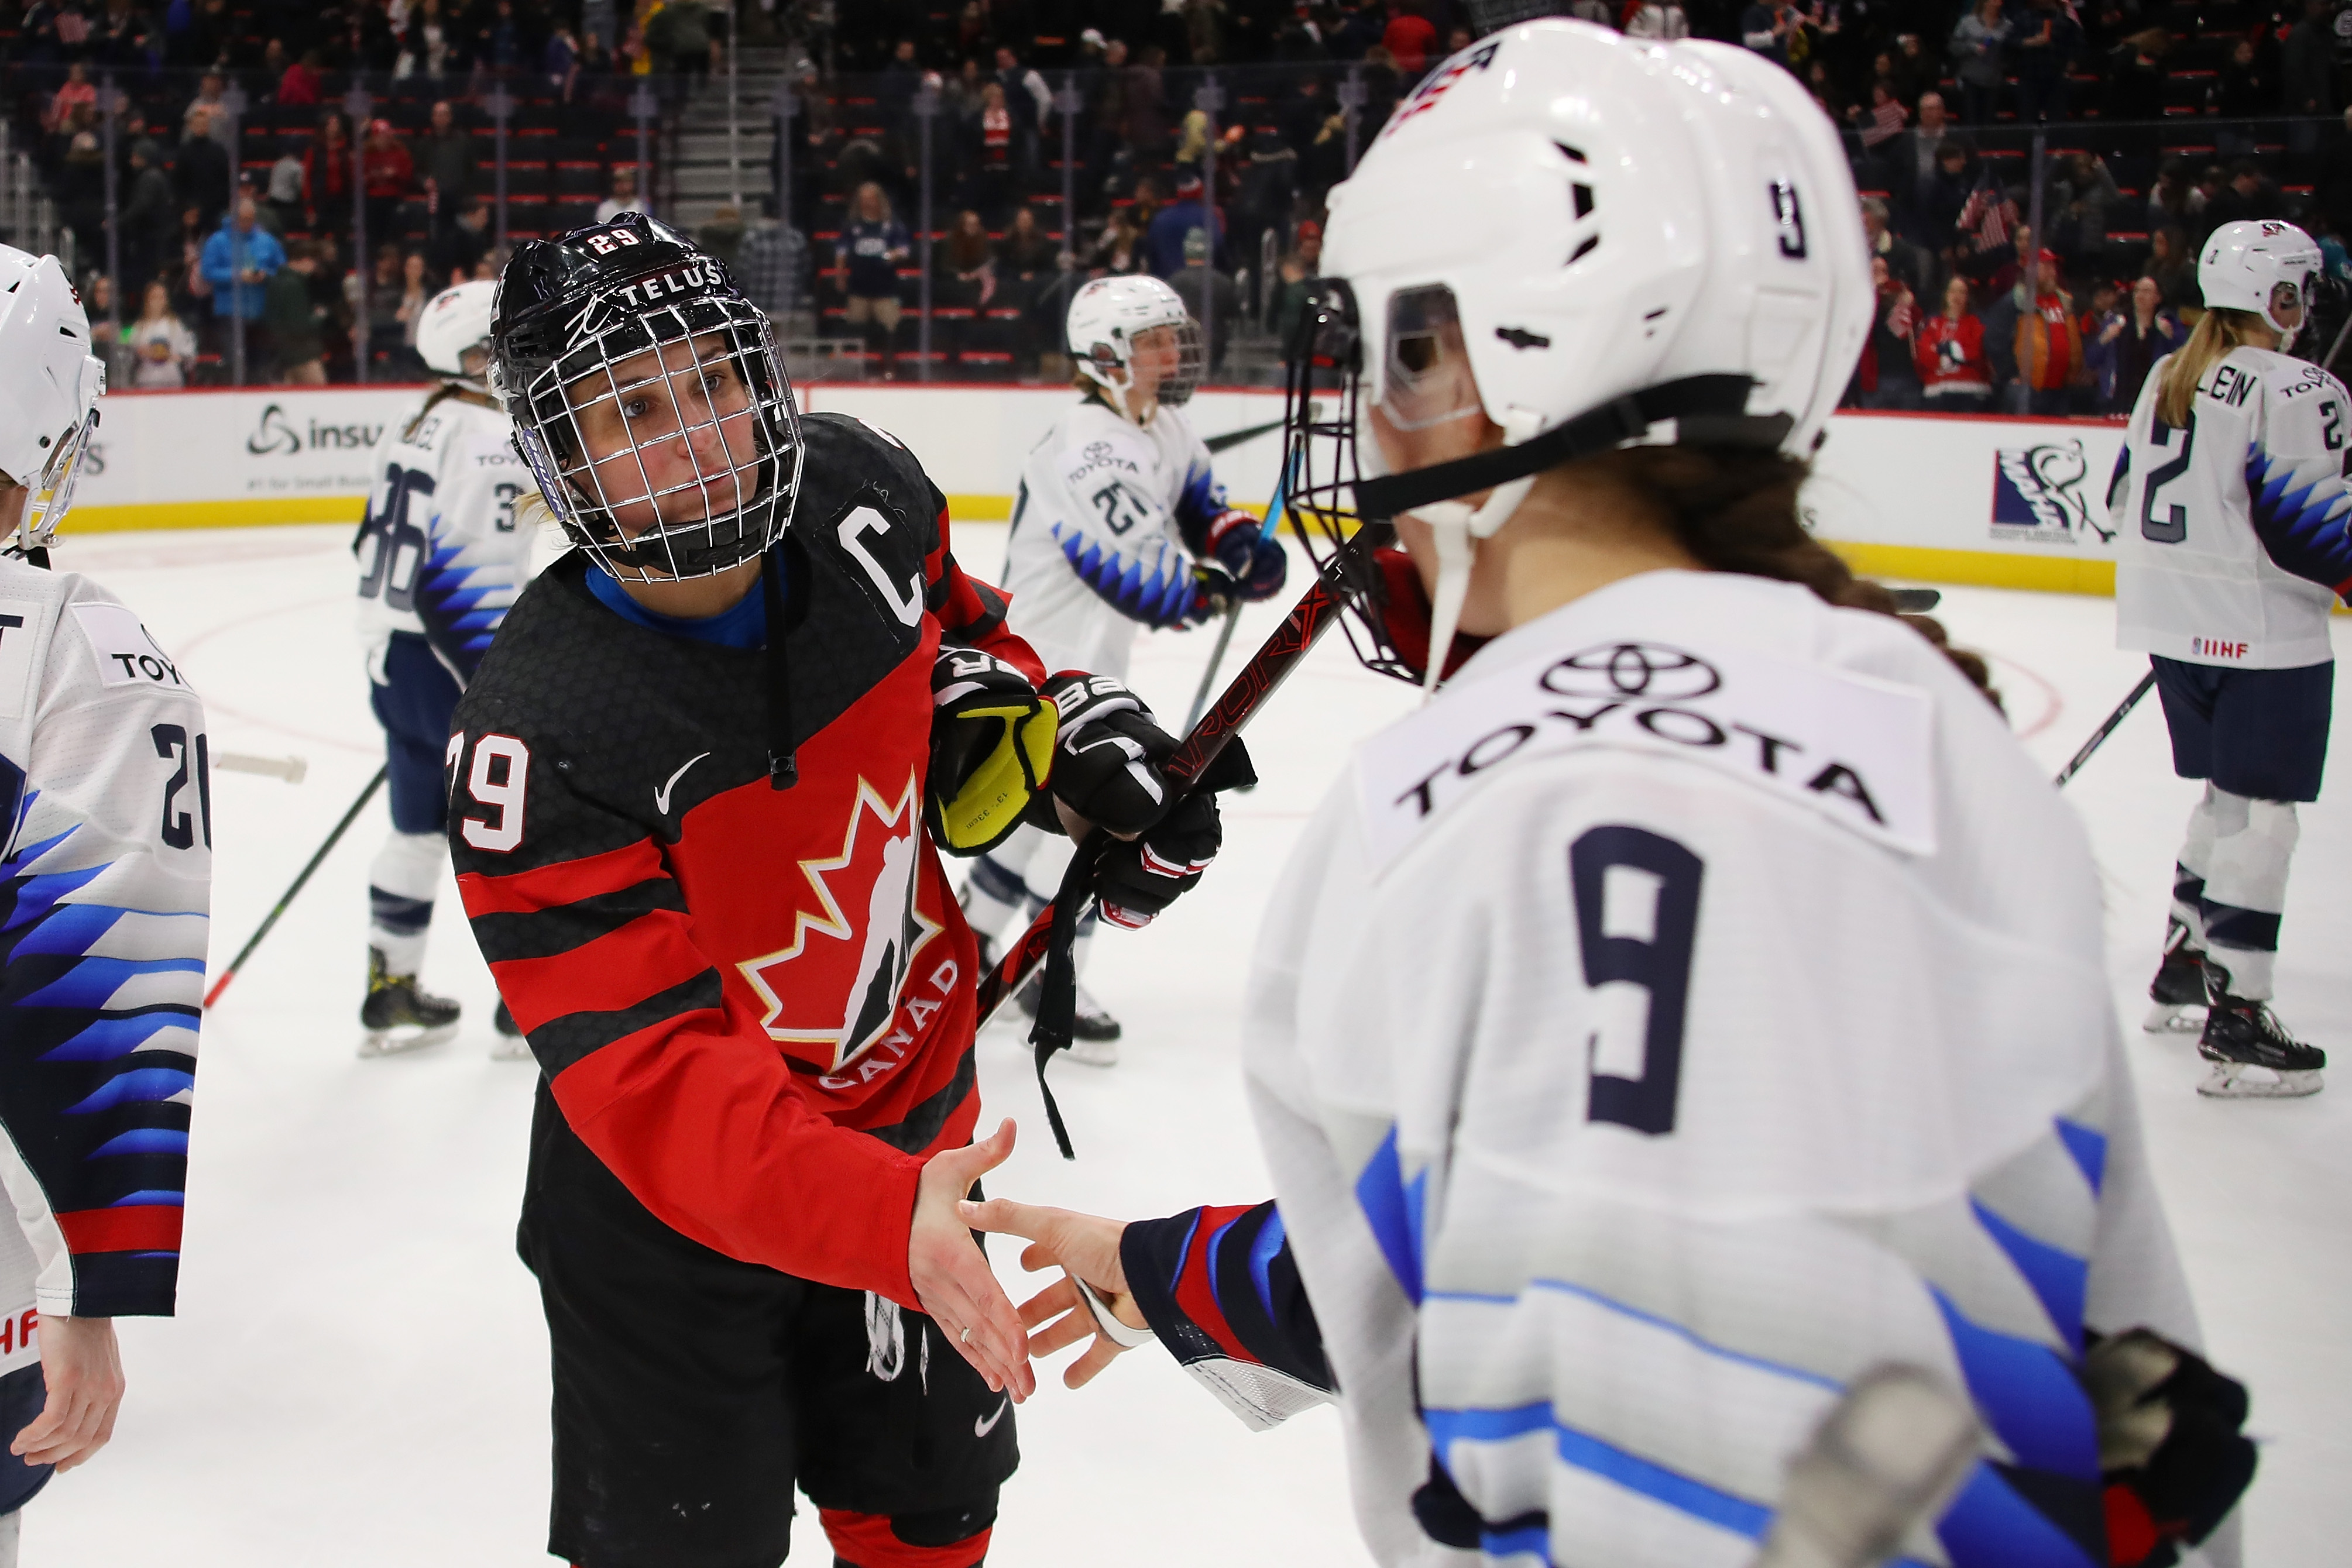 Marie-Philip Poulin #29 of Canada shakes hands with Megan Bozek #9 of the United States after a 2-0 Canada win at Little Caesars Arena on February 17, 2019 in Detroit, Michigan.